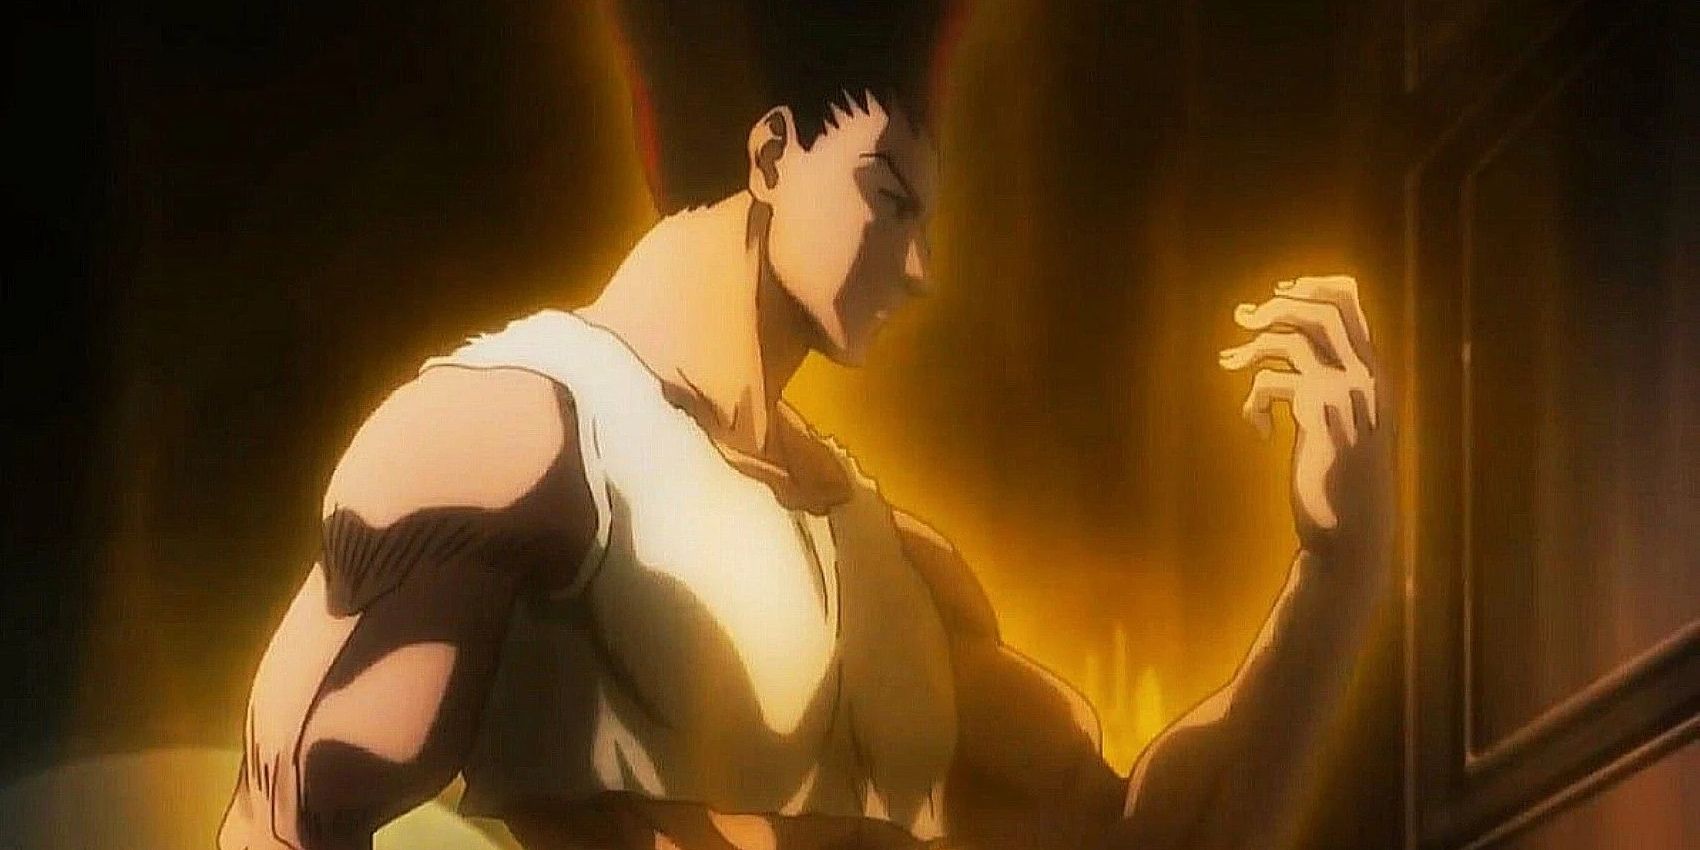 Hisoka vs. Gon: Who Won the Fight? (& Is He Really Stronger?)